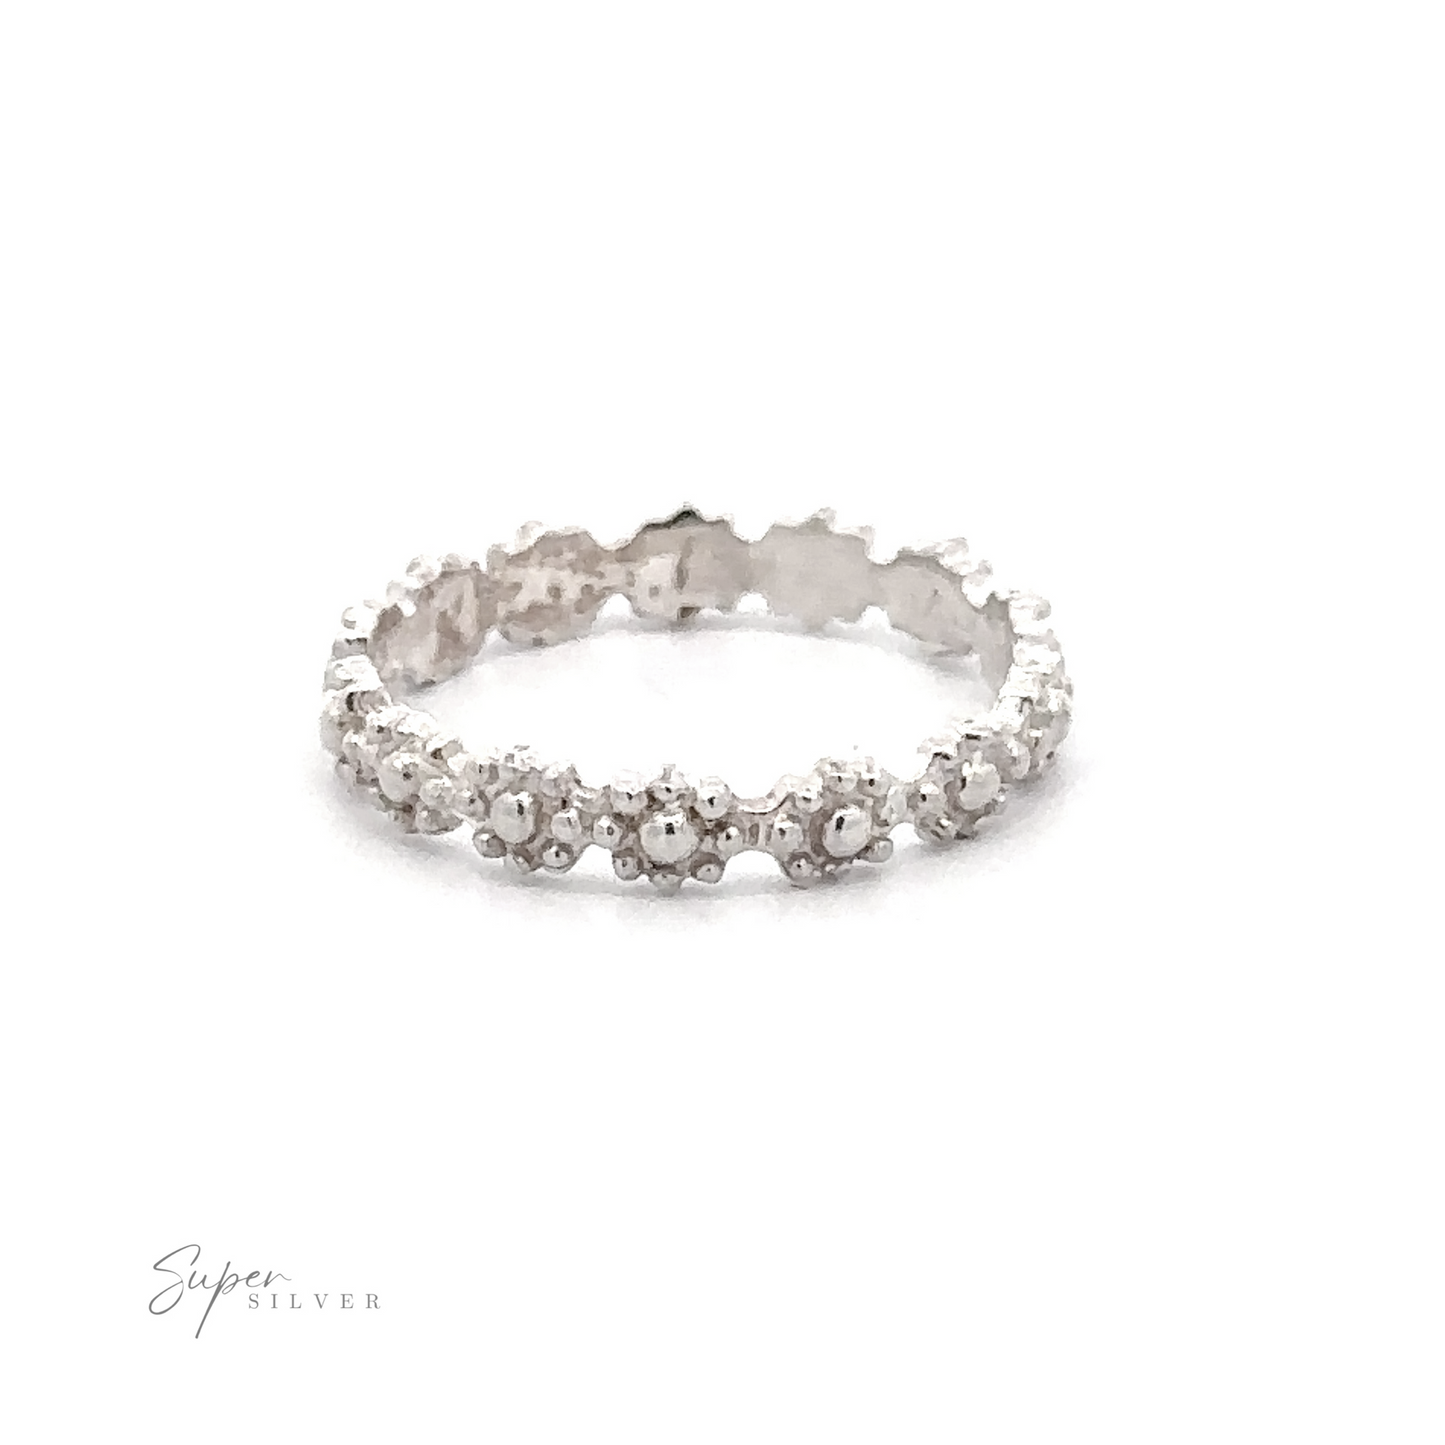 A Flowers Band Ring with a continuous row of small clear gemstones against a white background.